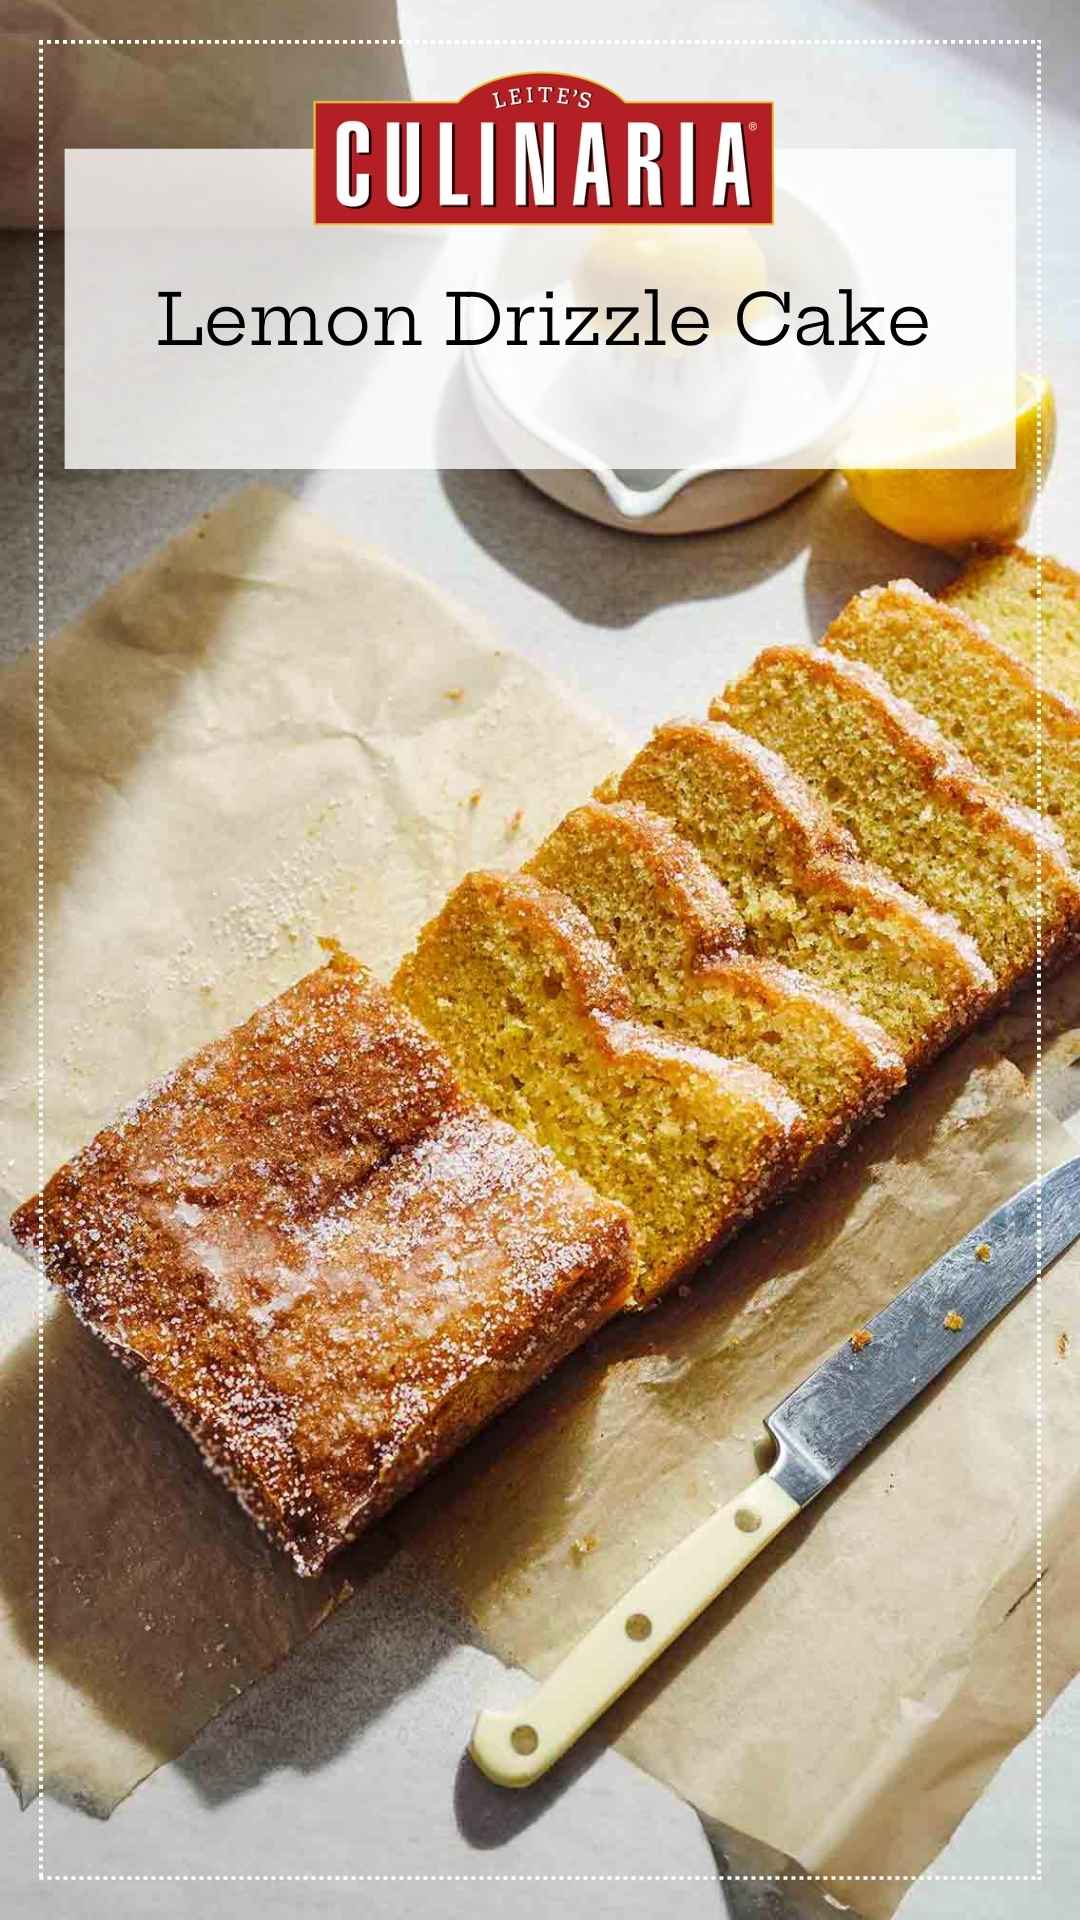 A partially sliced lemon drizzle cake with sugar topping on a piece of parchment paper.